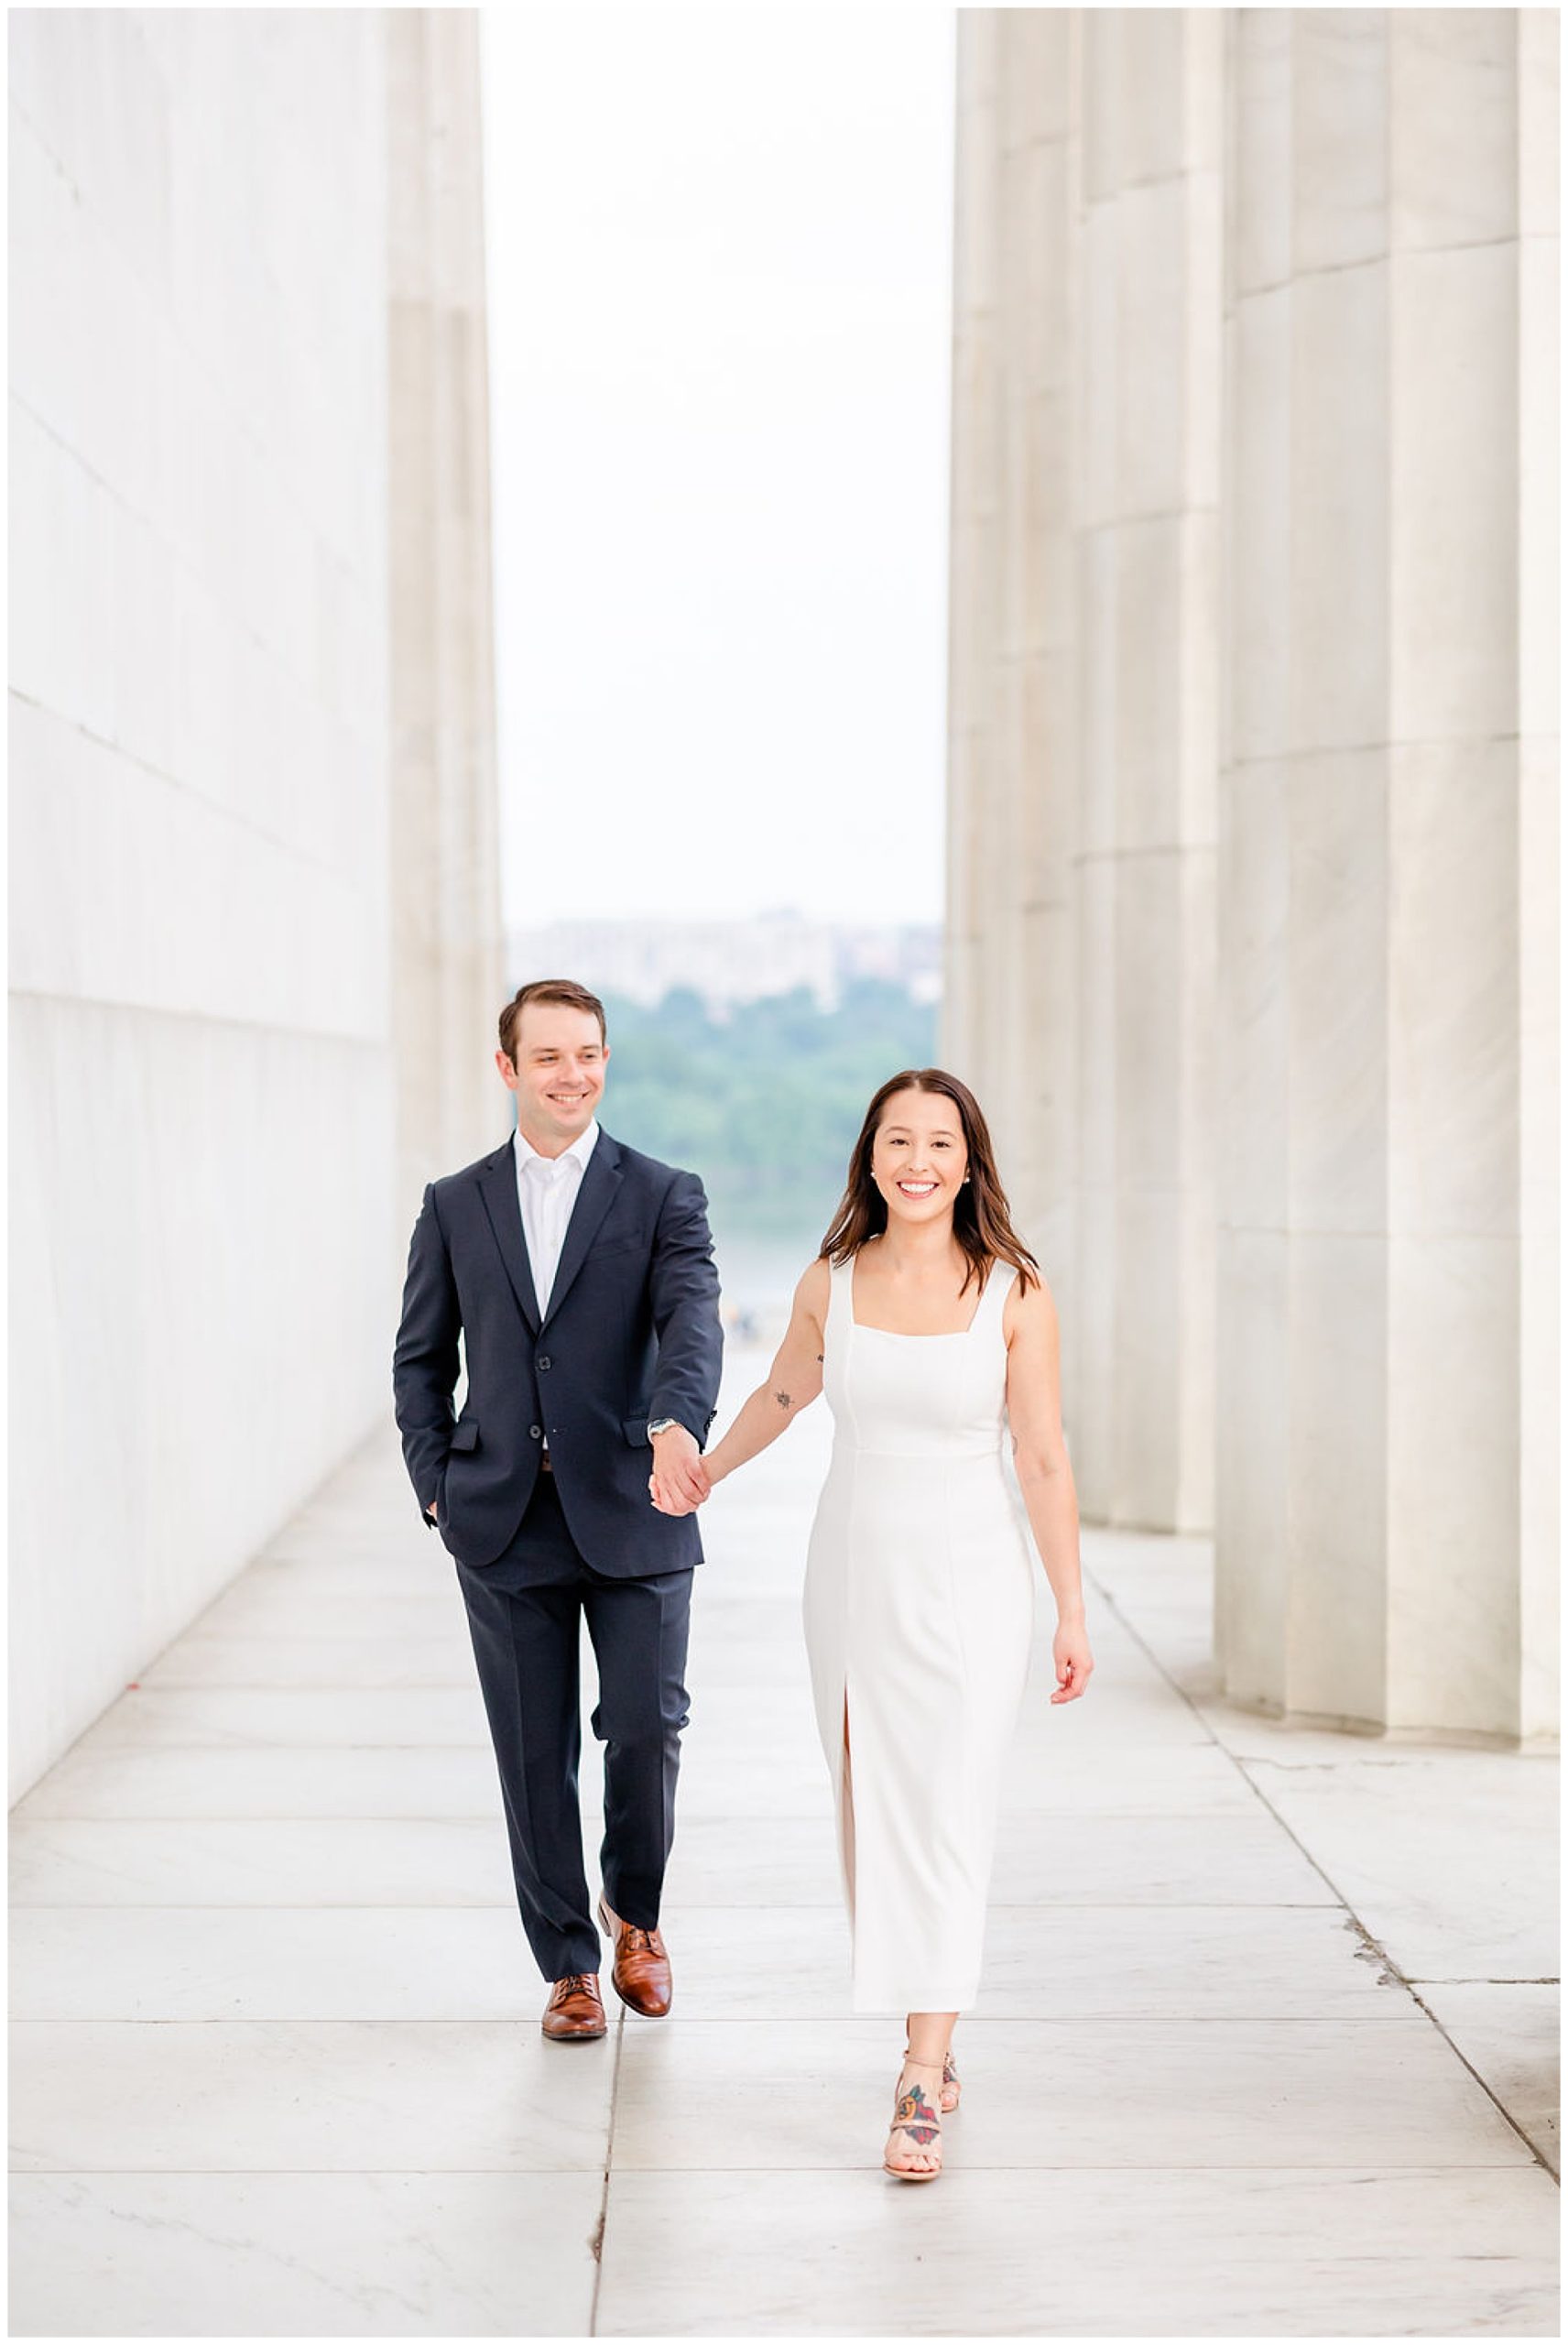 pink sunrise Lincoln Memorial engagement, DC engagement session, DC engagement photographer, formal DC engagement photos, DC elopement photographer, DC wedding photographer, classic DC engagement photos, luxury DC engagement photographer, Rachel E.H. Photography, couple holding hands from distance, woman walking towards camera, couple walking